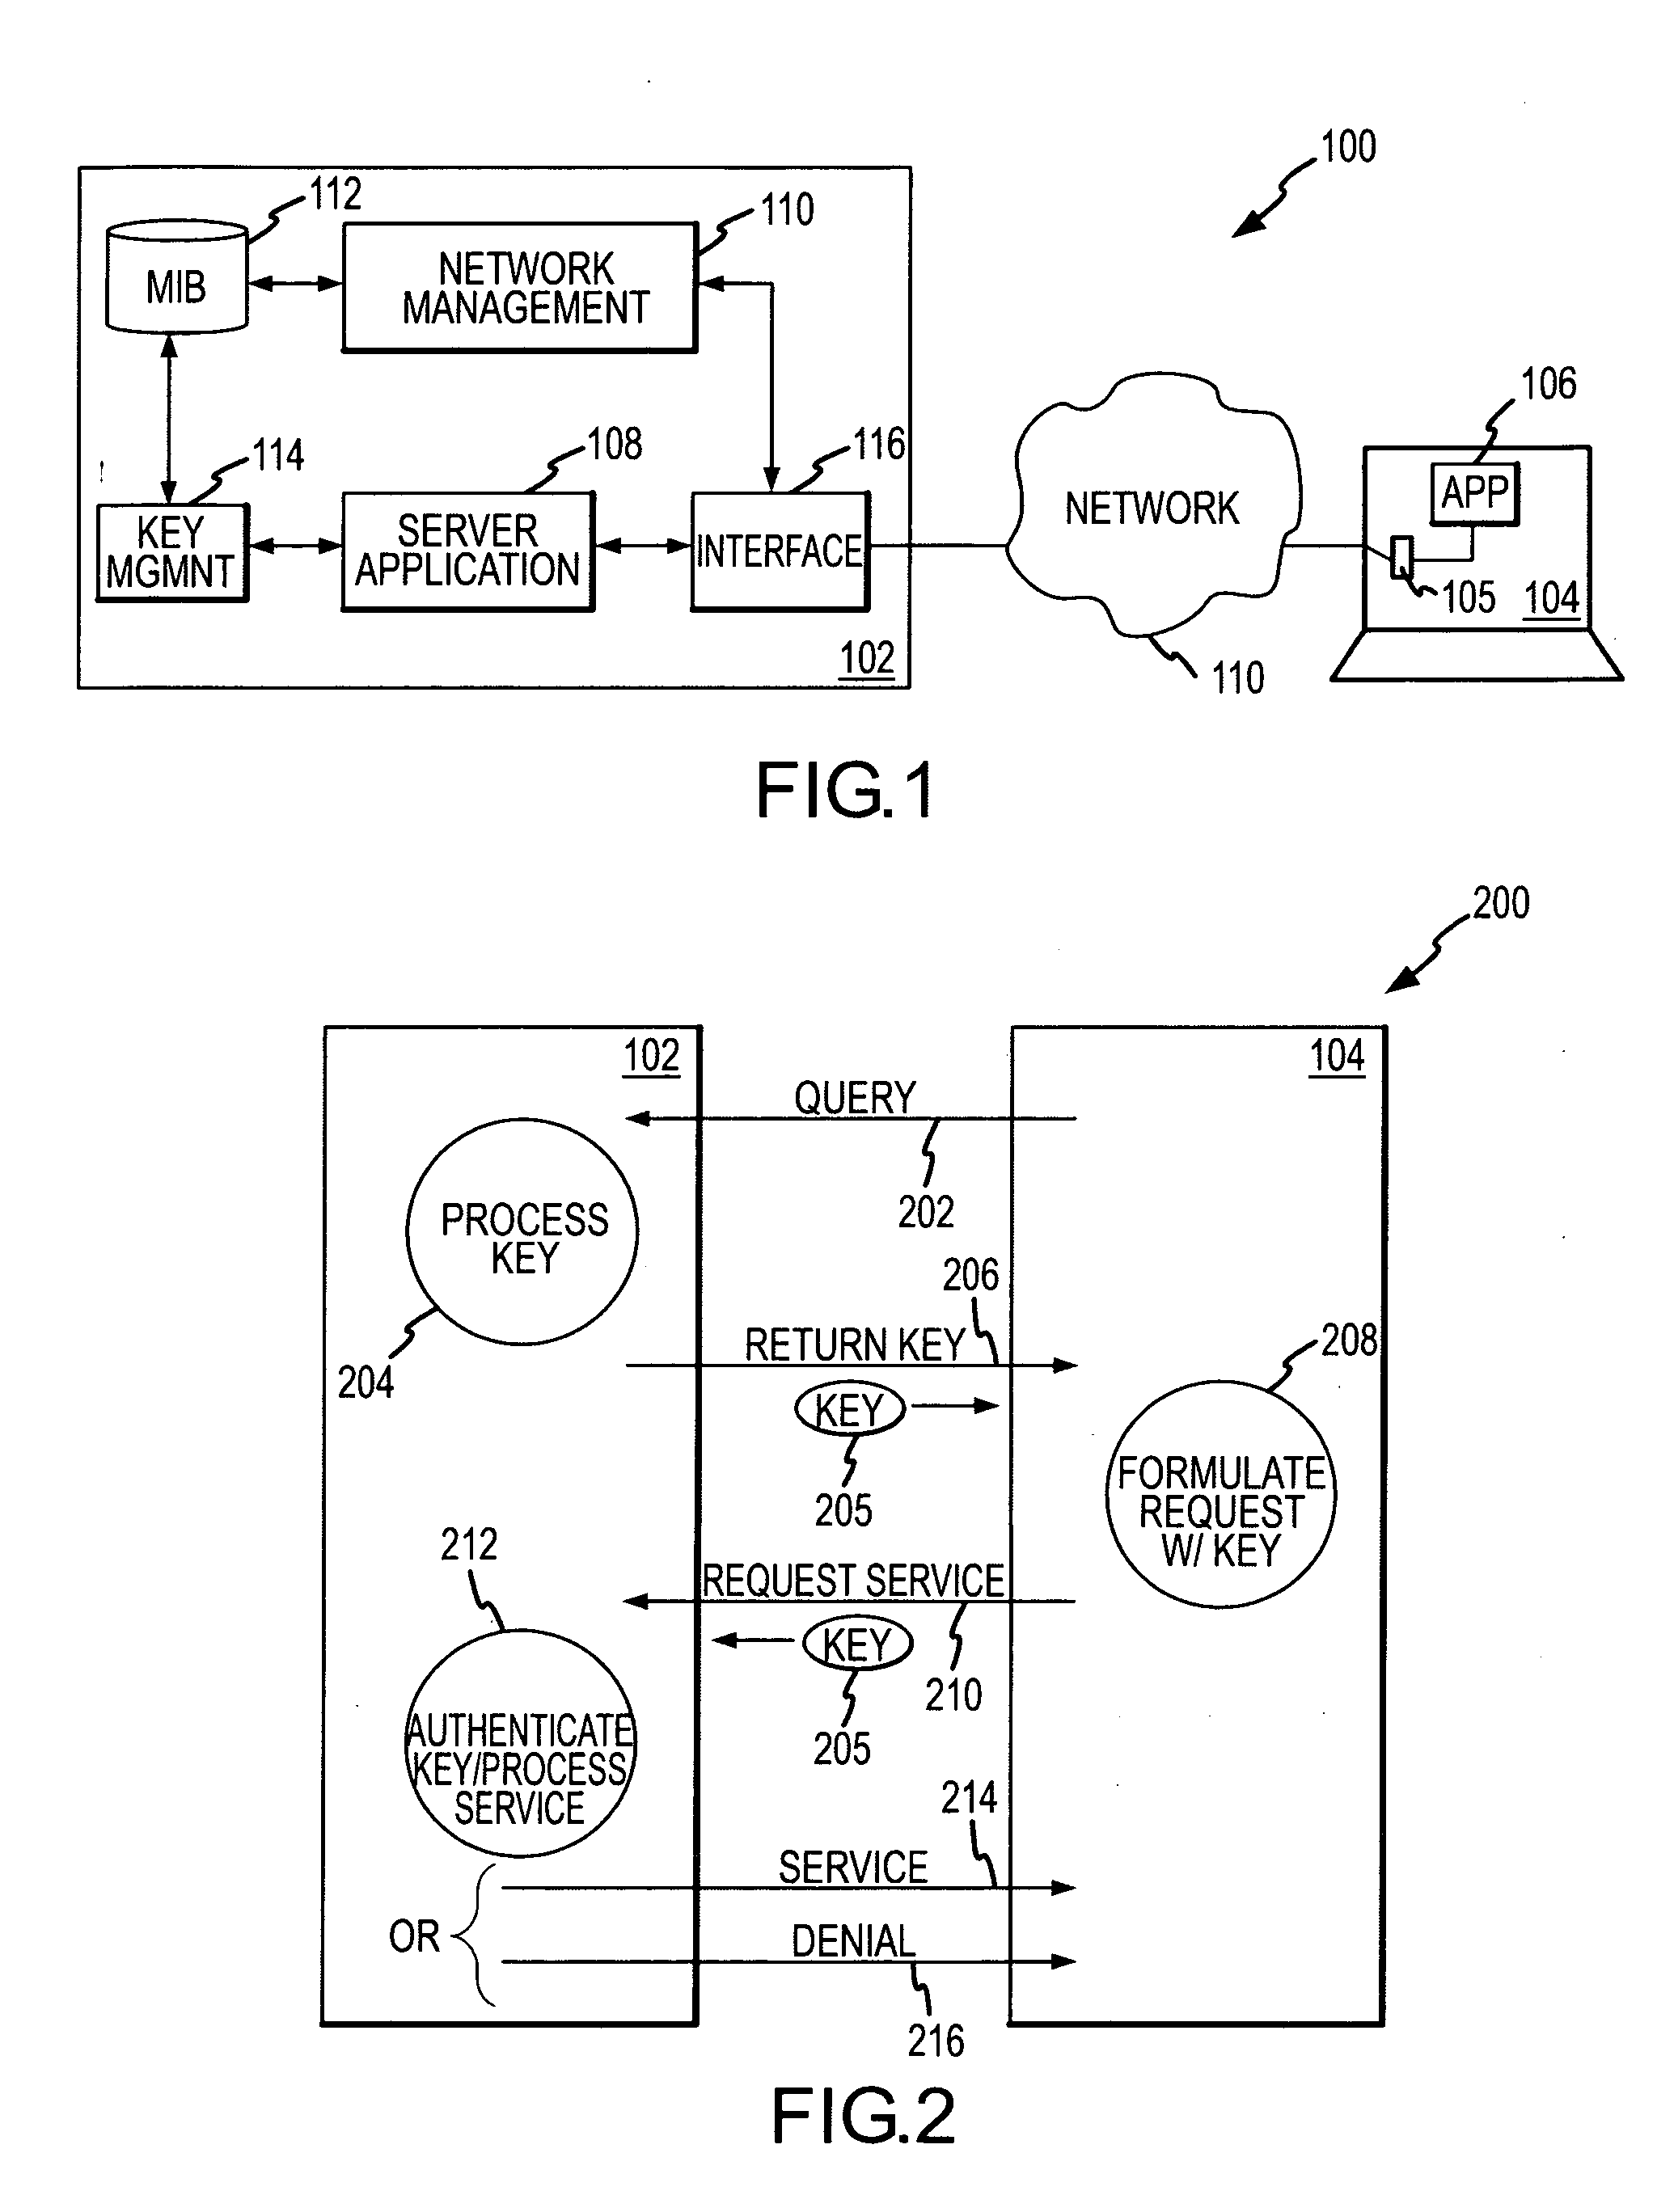 Systems and methods for providing access to network resources based upon temporary keys